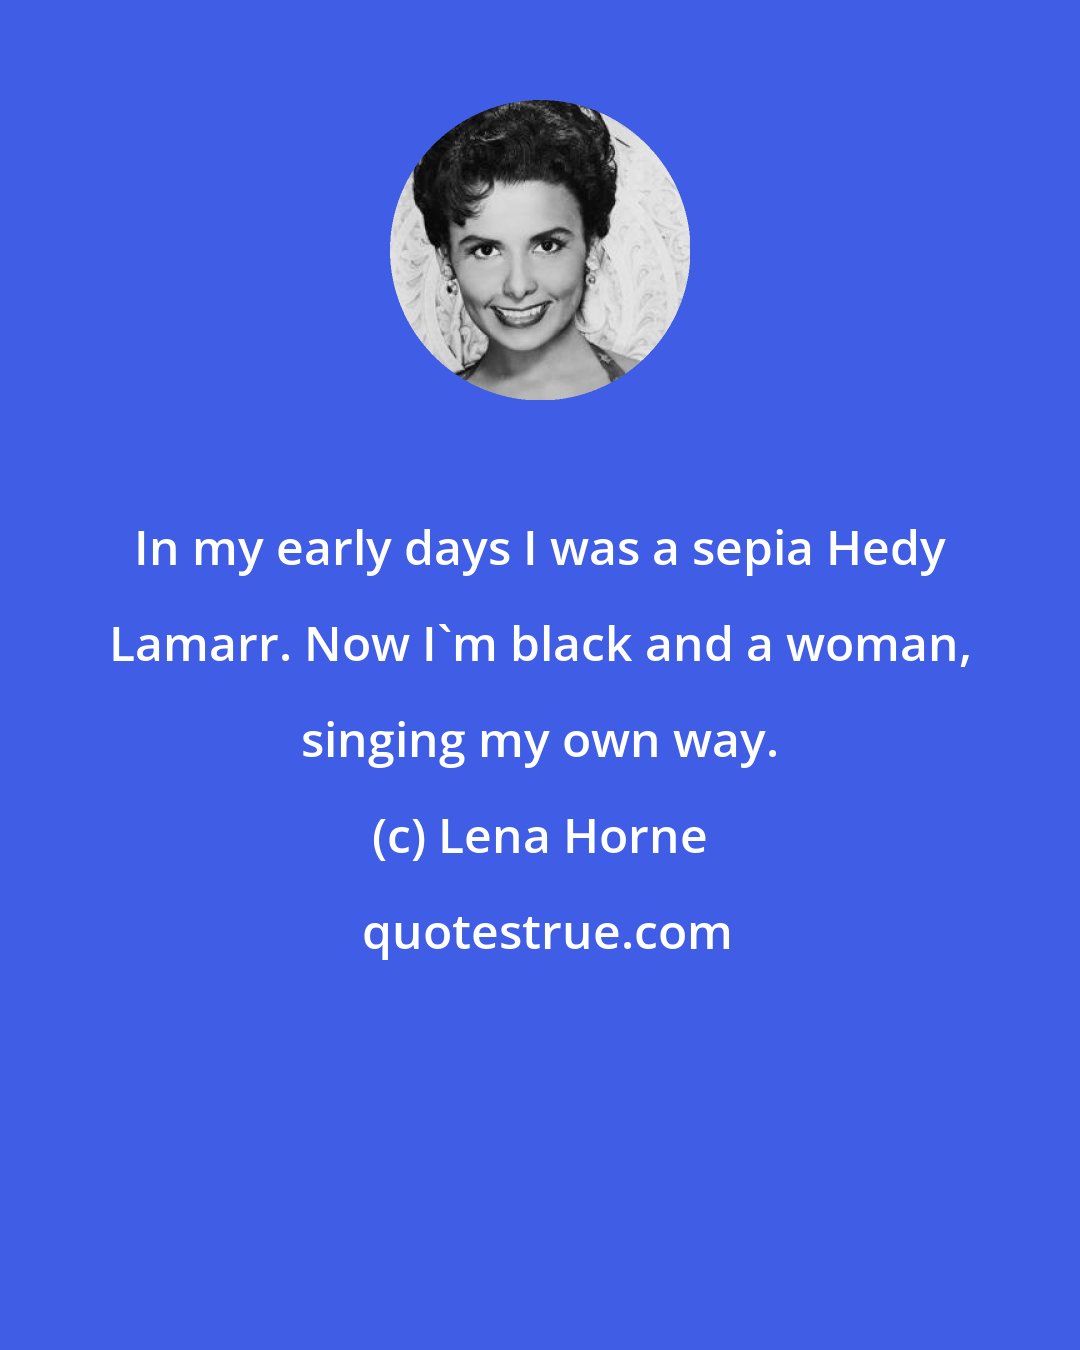 Lena Horne: In my early days I was a sepia Hedy Lamarr. Now I'm black and a woman, singing my own way.